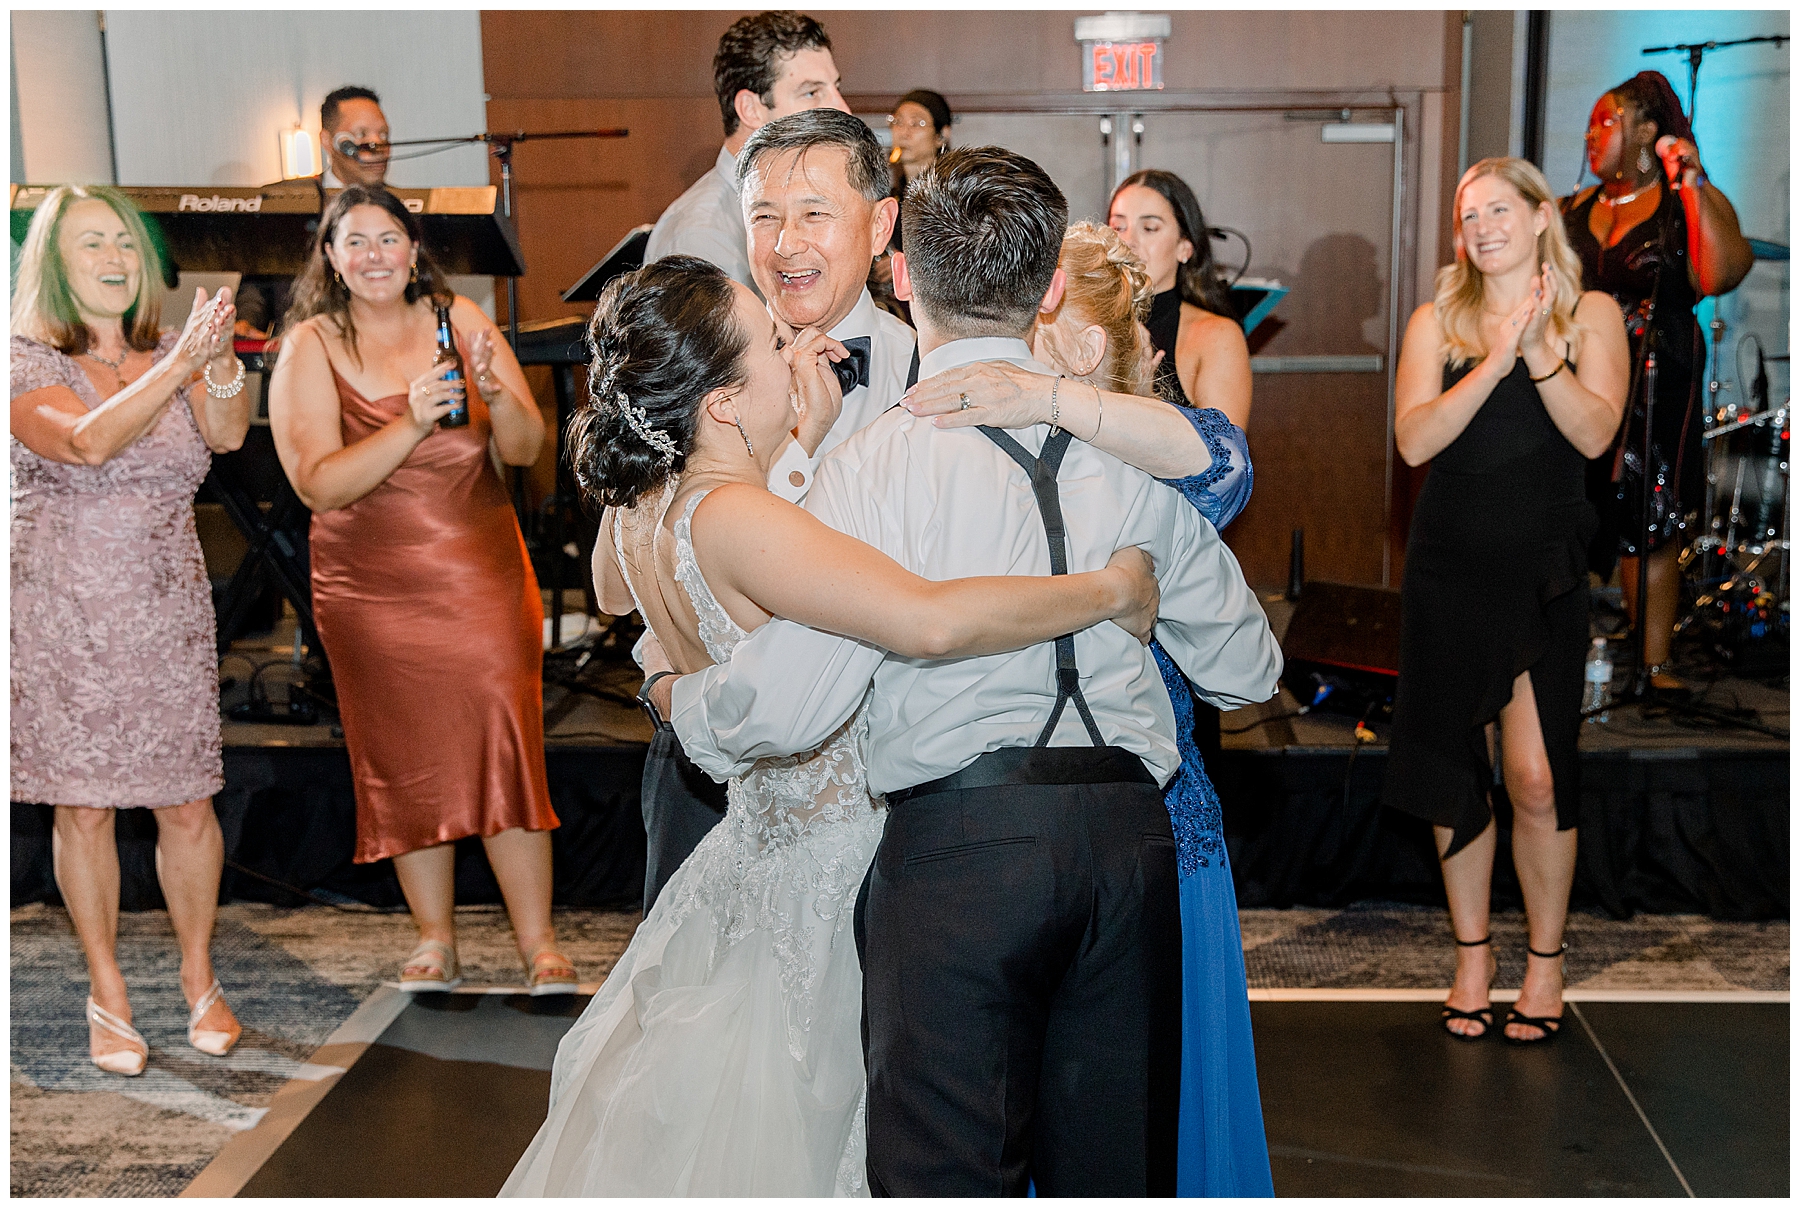 bride and groom dancing with family and friends at Boston Marriott Long Wharf Wedding reception